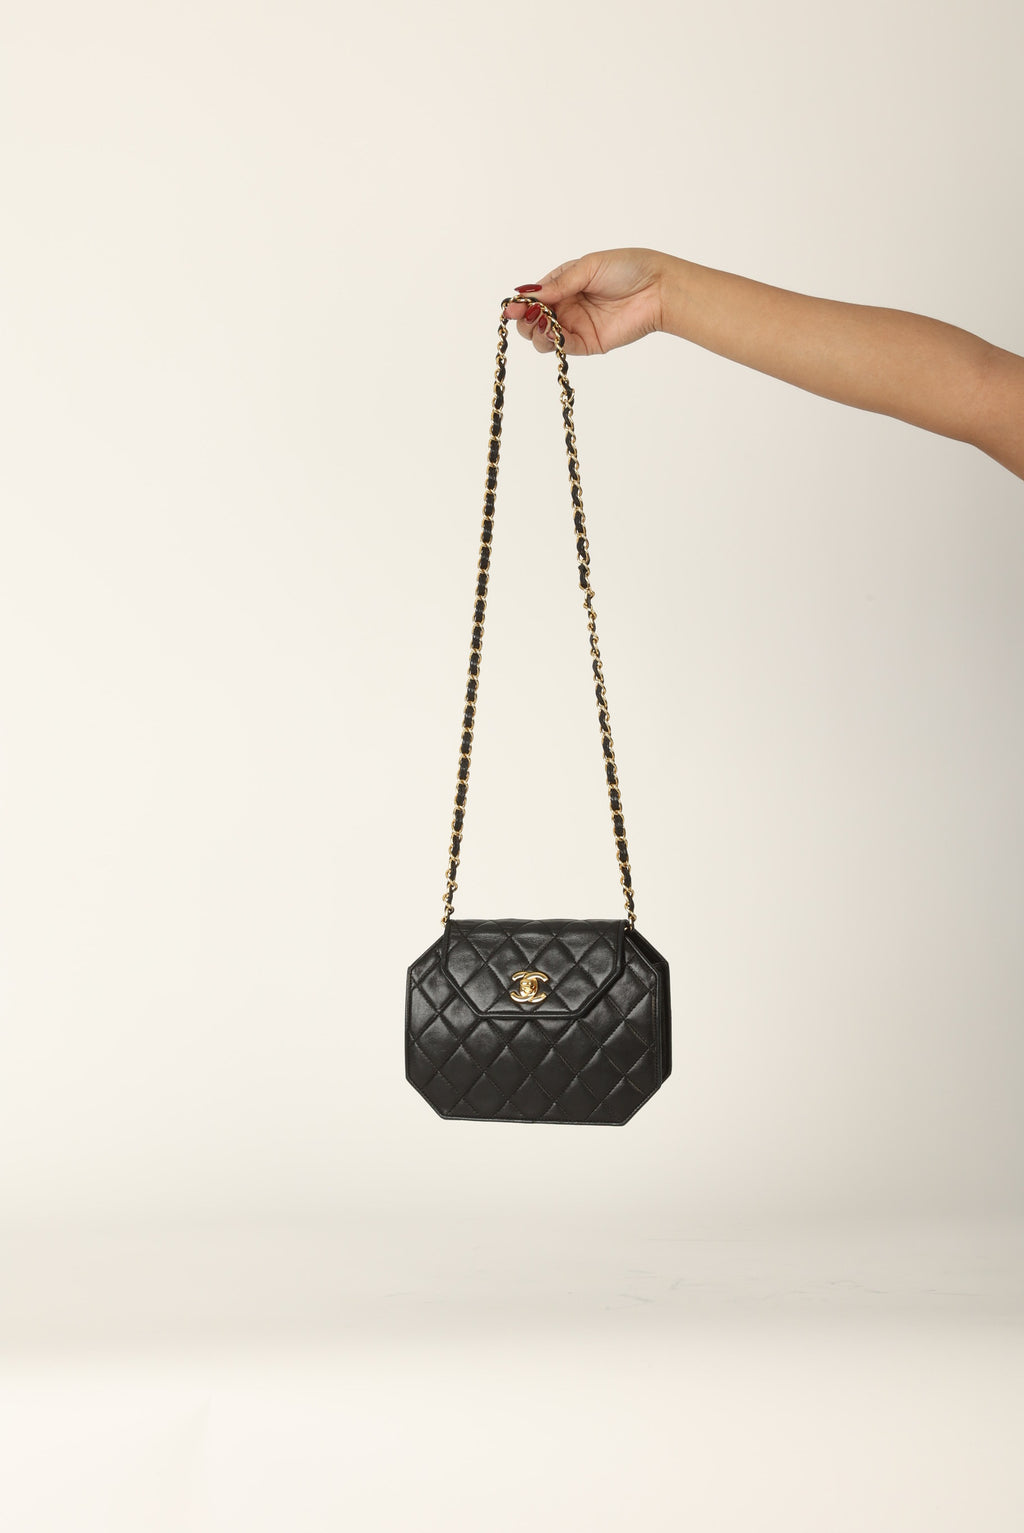 Chanel Patent Double Turnlock Flap Bag – SFN